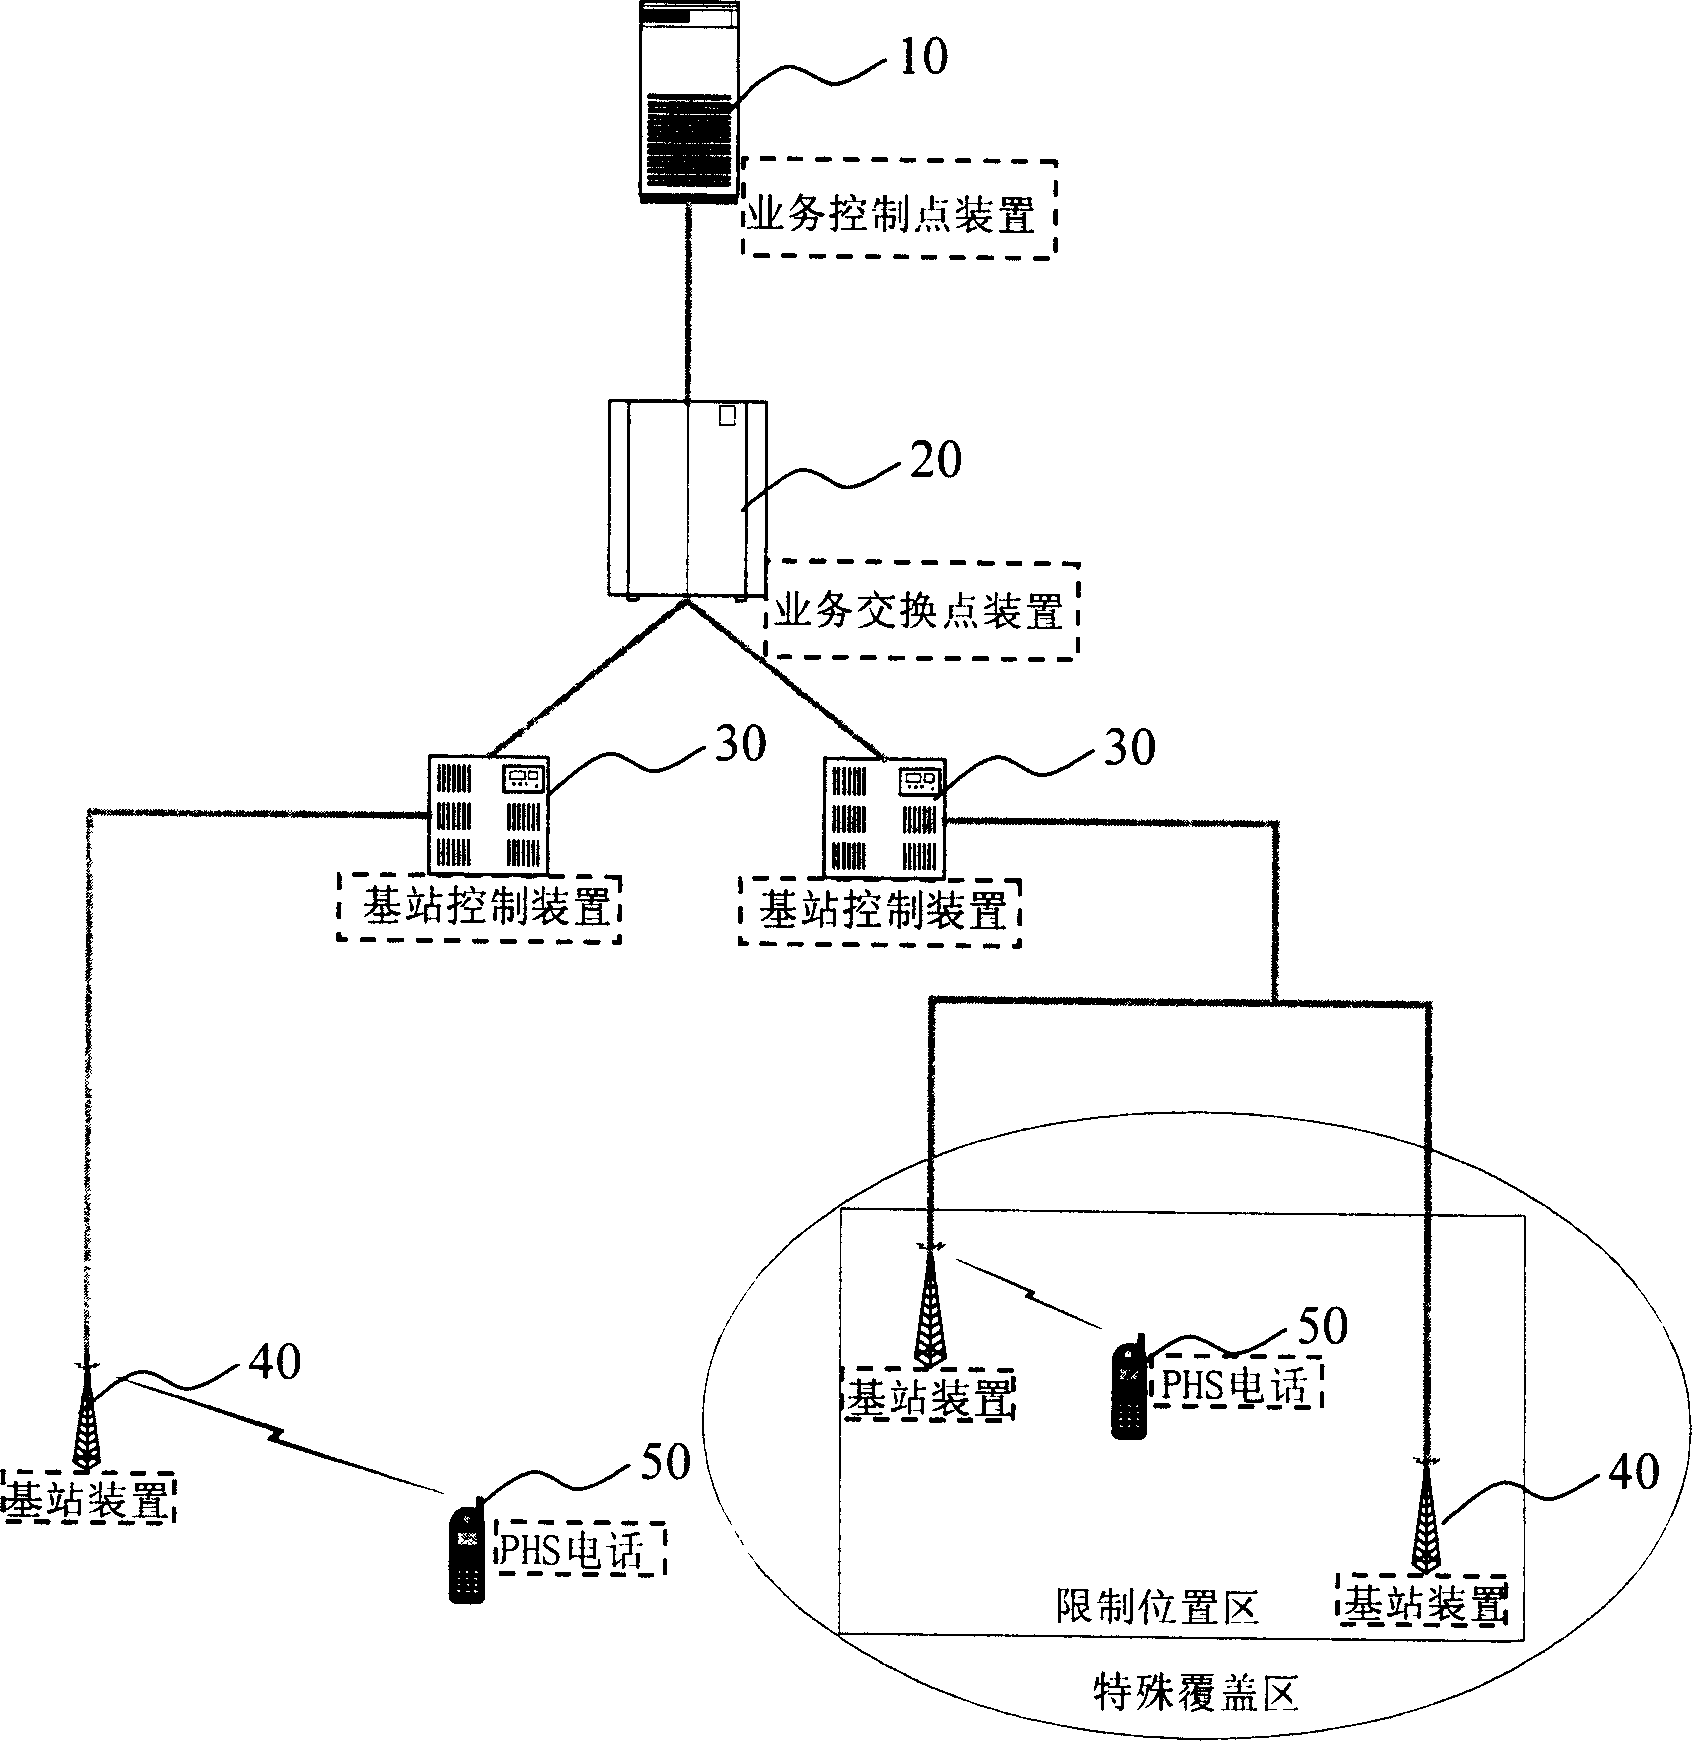 Method and system for implementing call authority based on PHS intelligent network